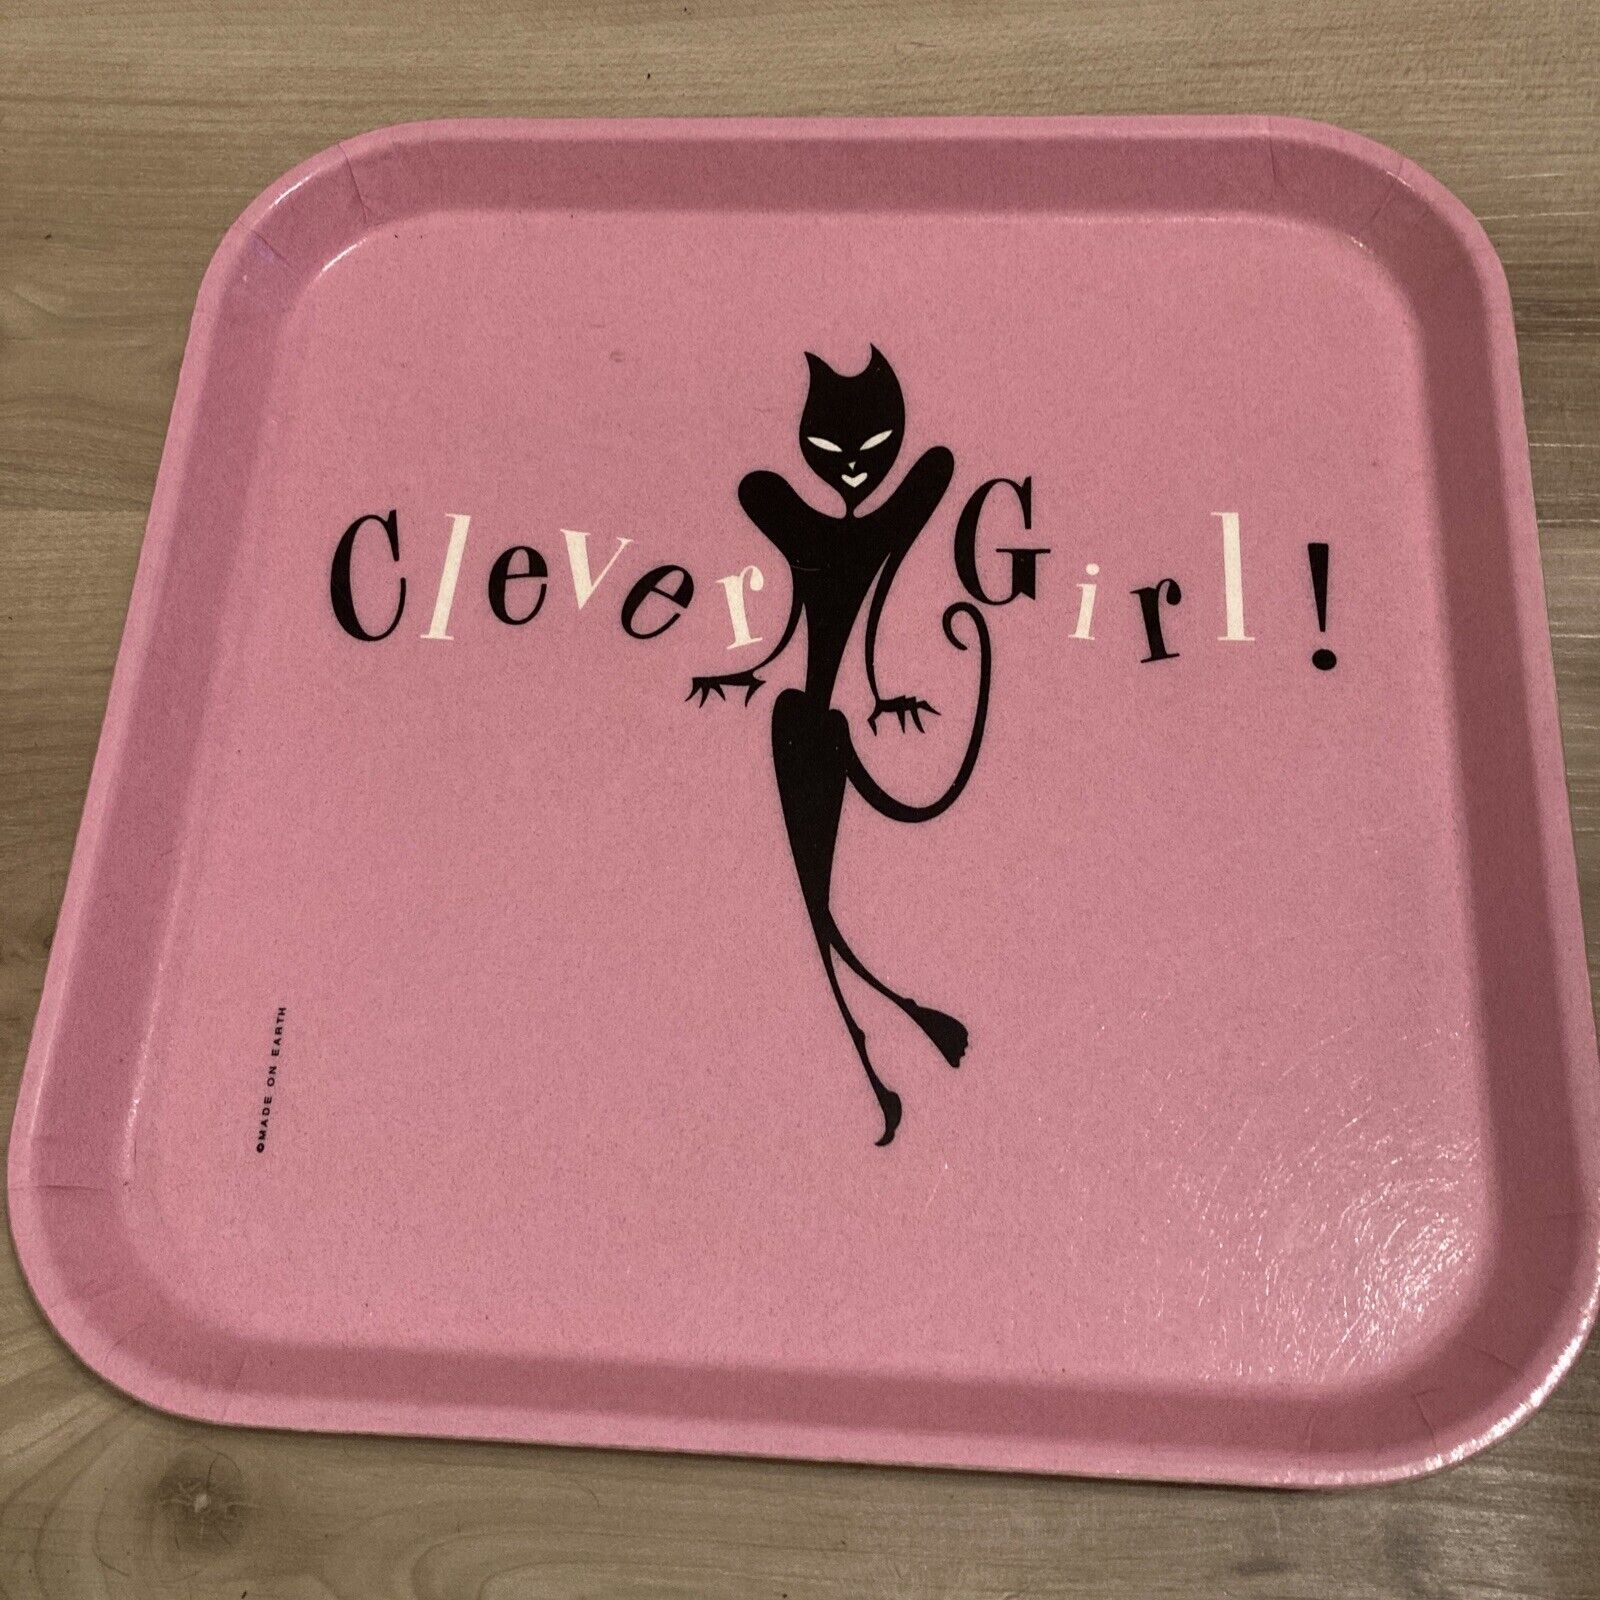 Vintage Clever Girl Hot Pink Camtray Made on Earth serving tray